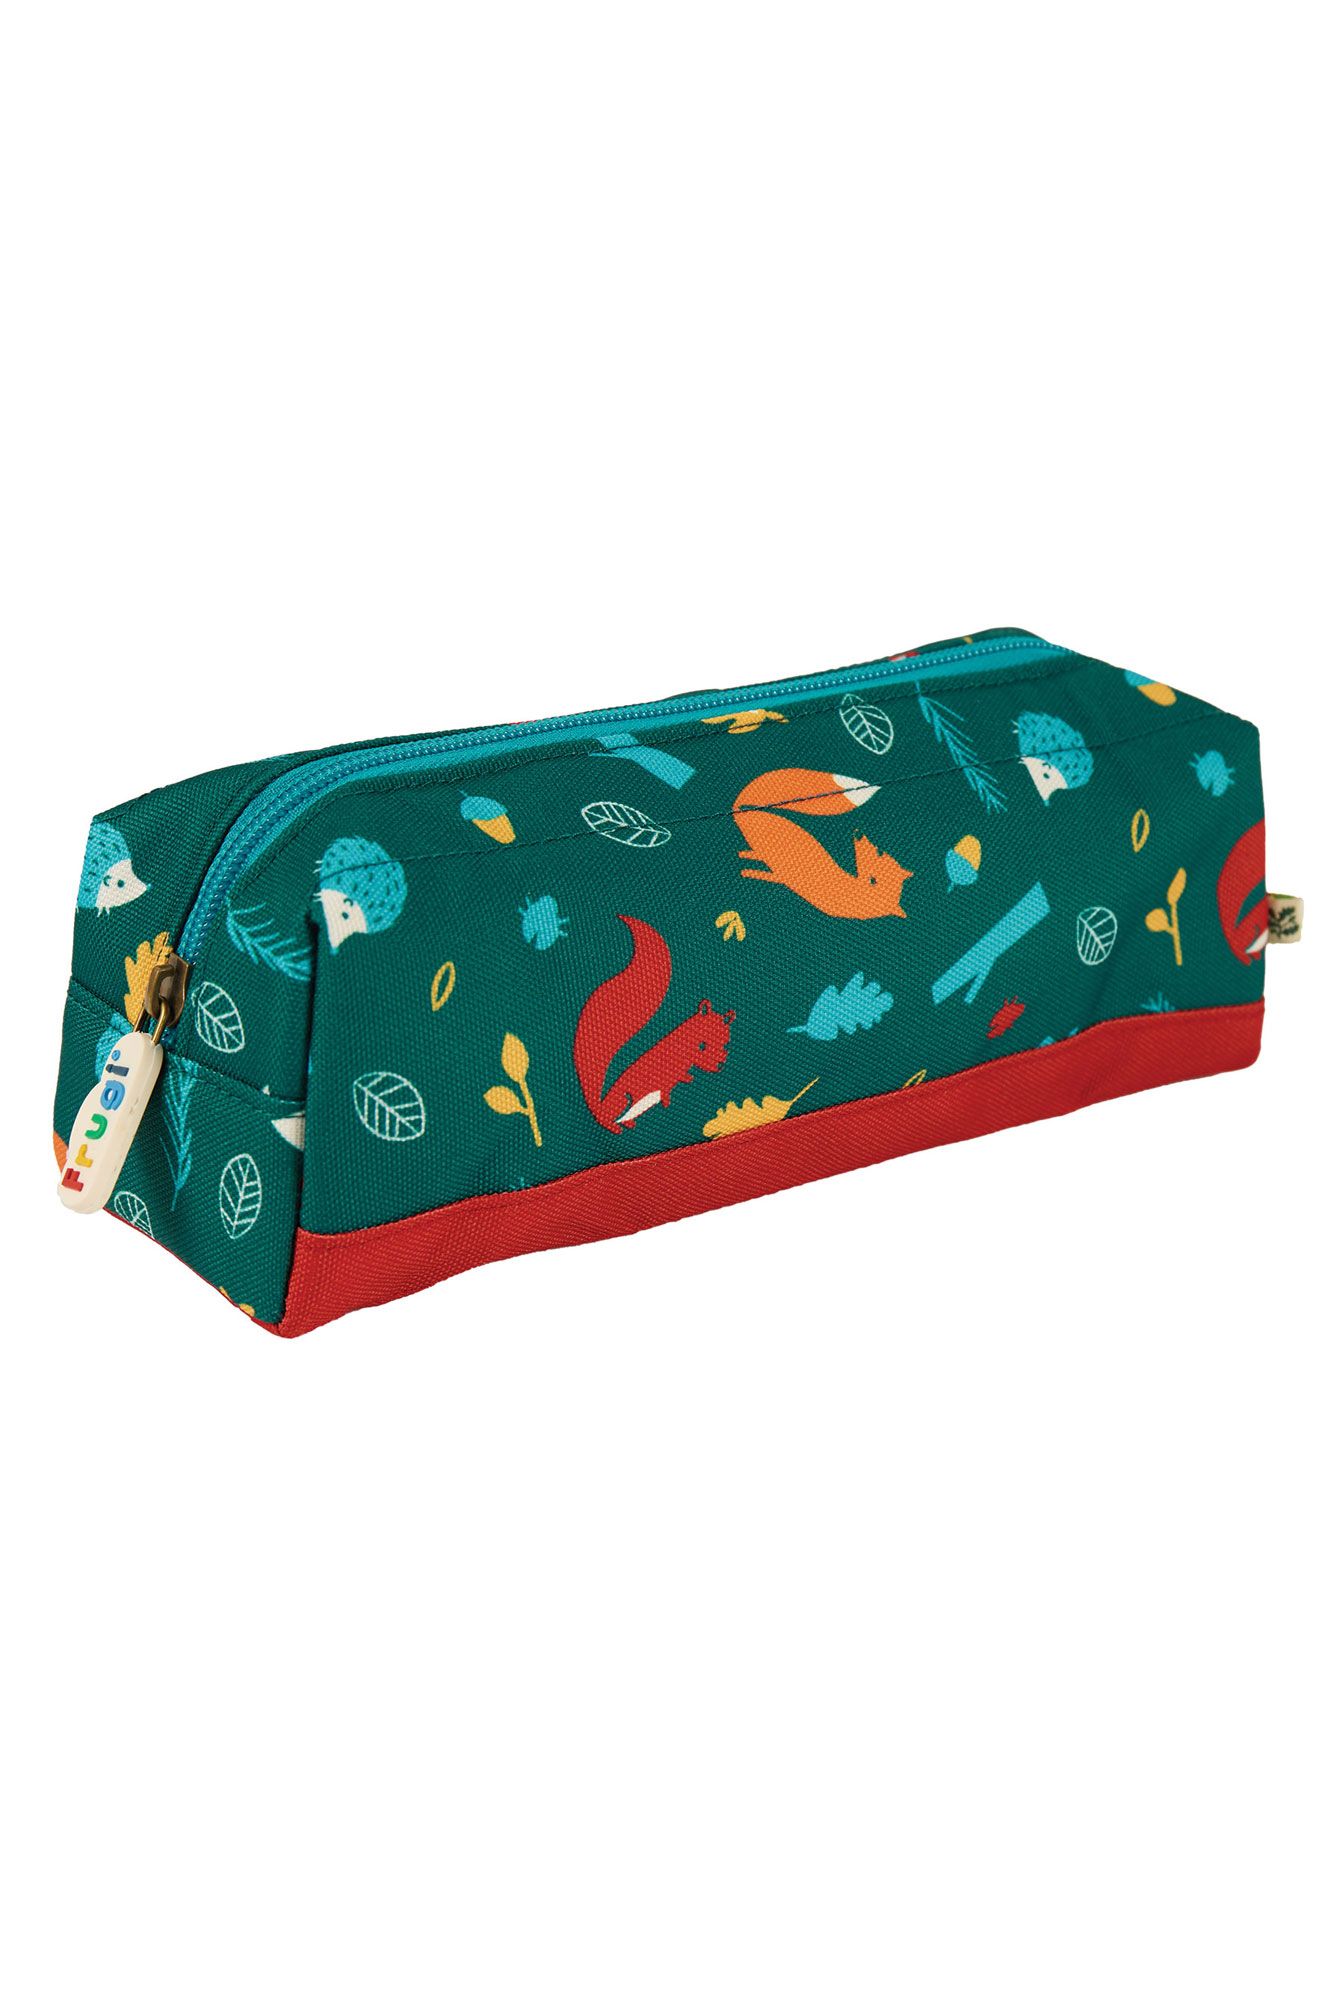 The National Trust Crafty Pencil Case